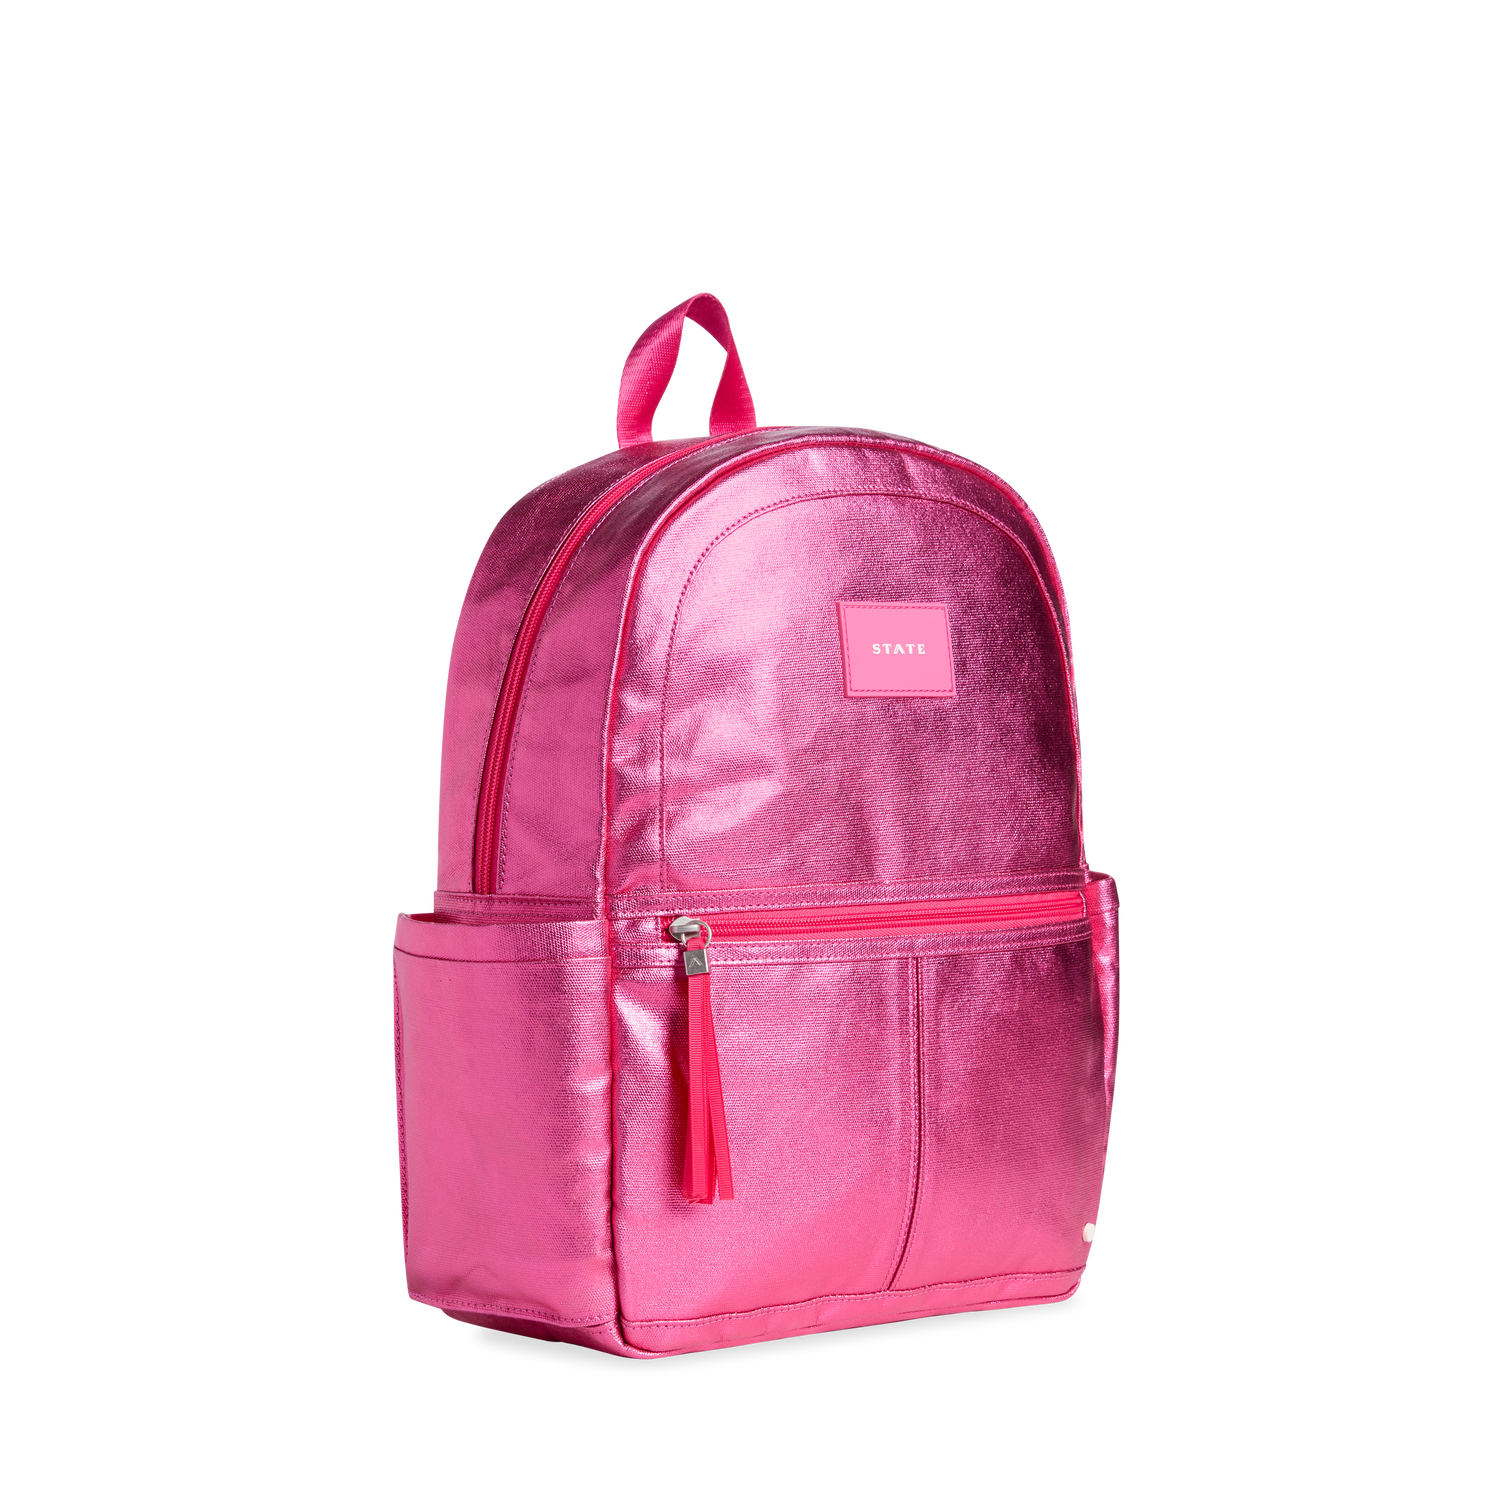 STATE Bags | Rodgers Lunch Box Metallic Turquoise/Hot Pink